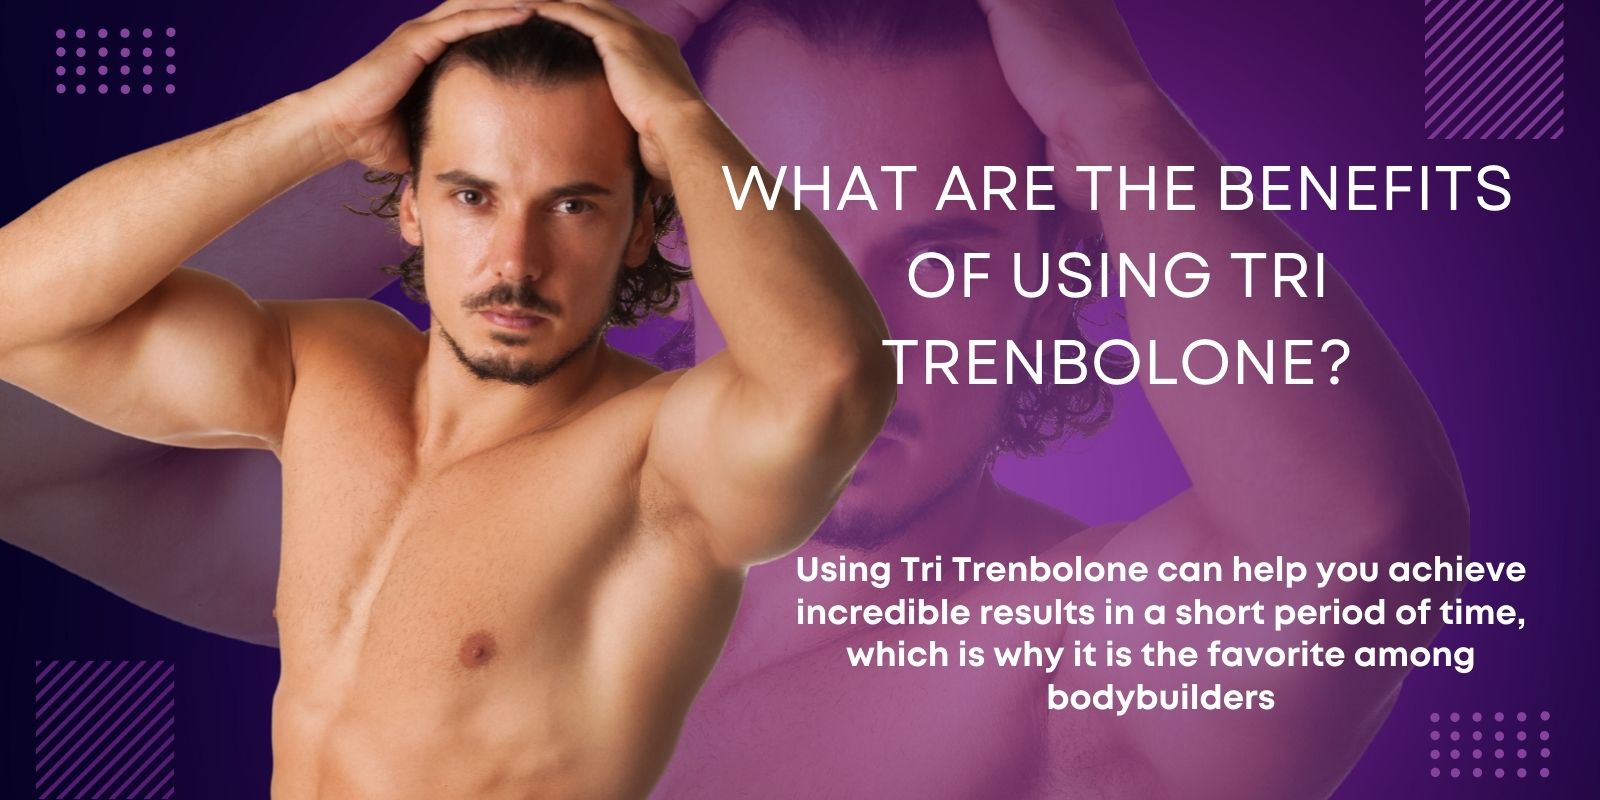 What are the benefits of using Tri Trenbolone?